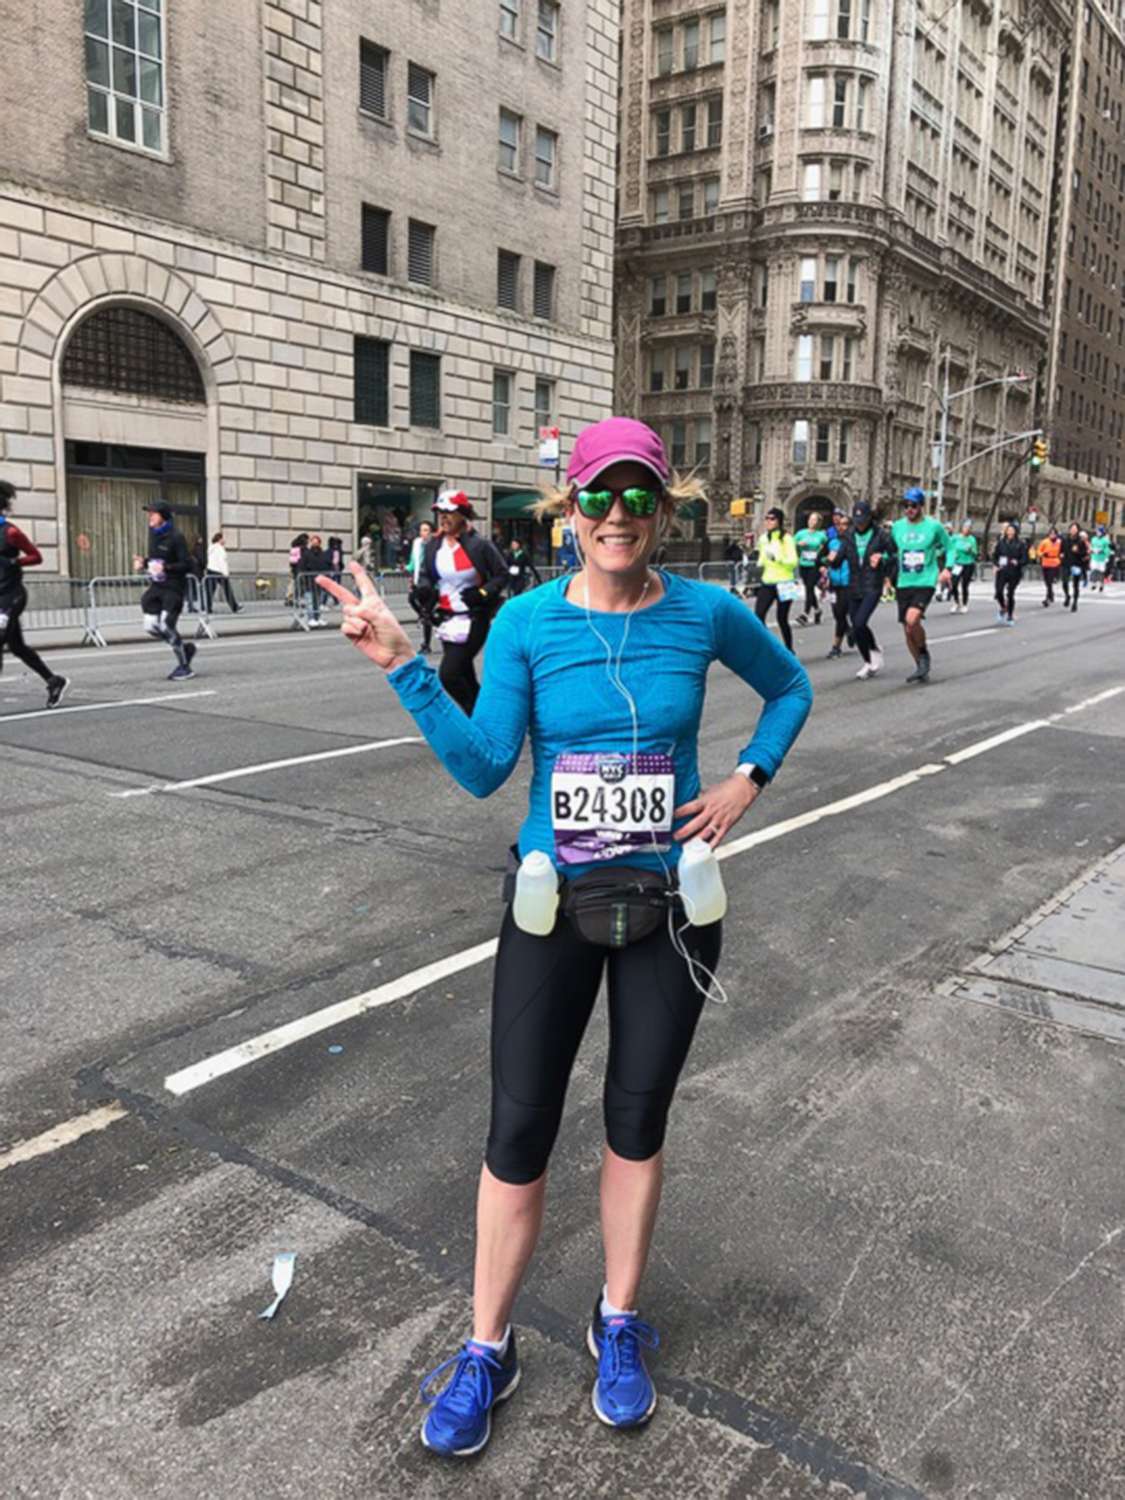 PHOTO: Celeste Yvonne poses for a photo during the New York Half Marathon in March 2019.